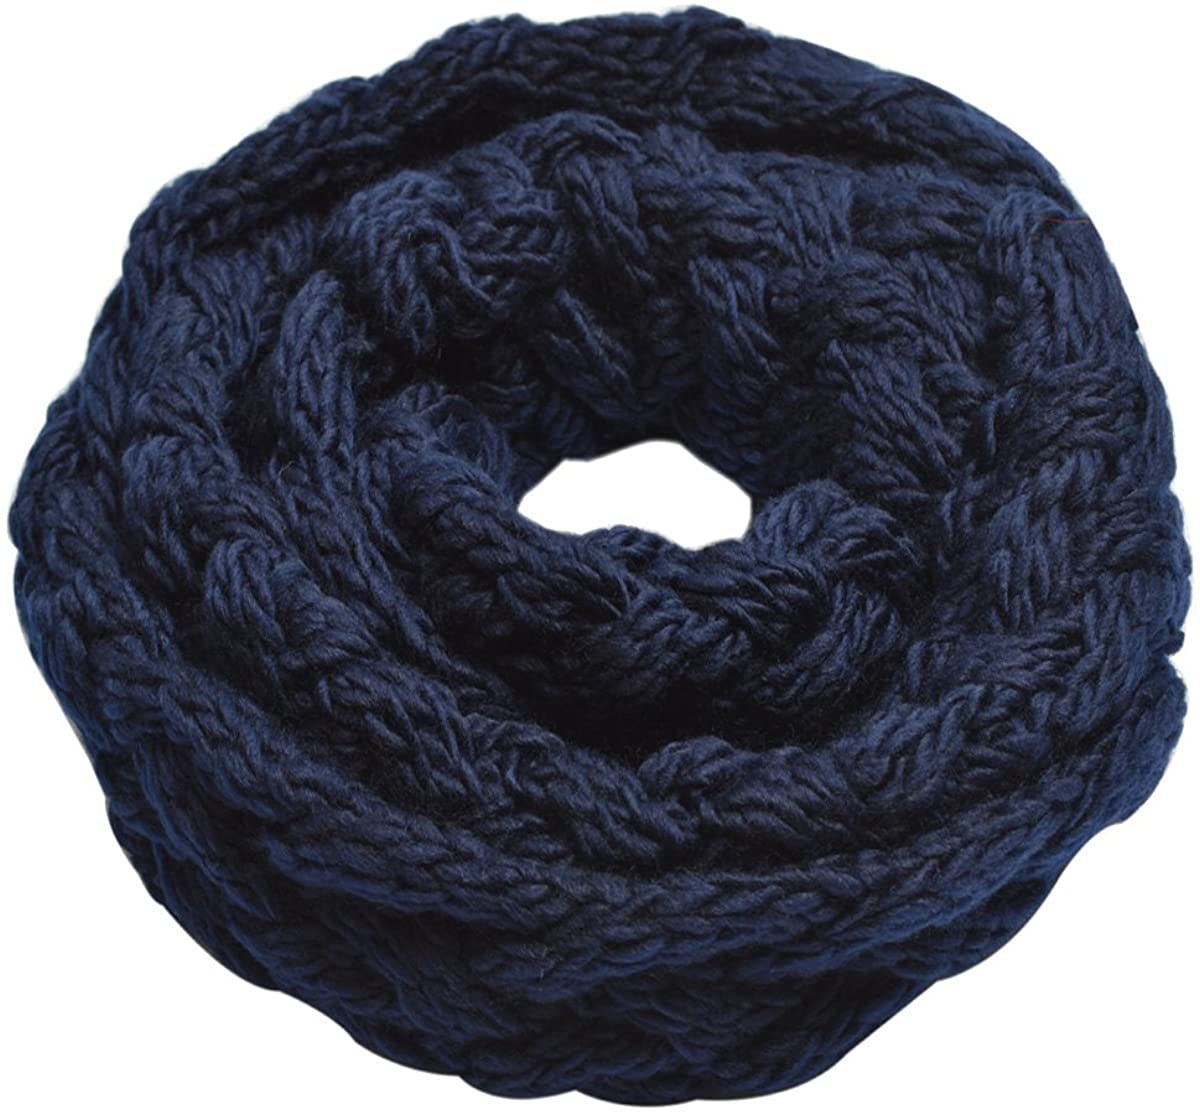 Premium Solid Winter Criss Cross Knit Thick Infinity Loop Circle Scarf